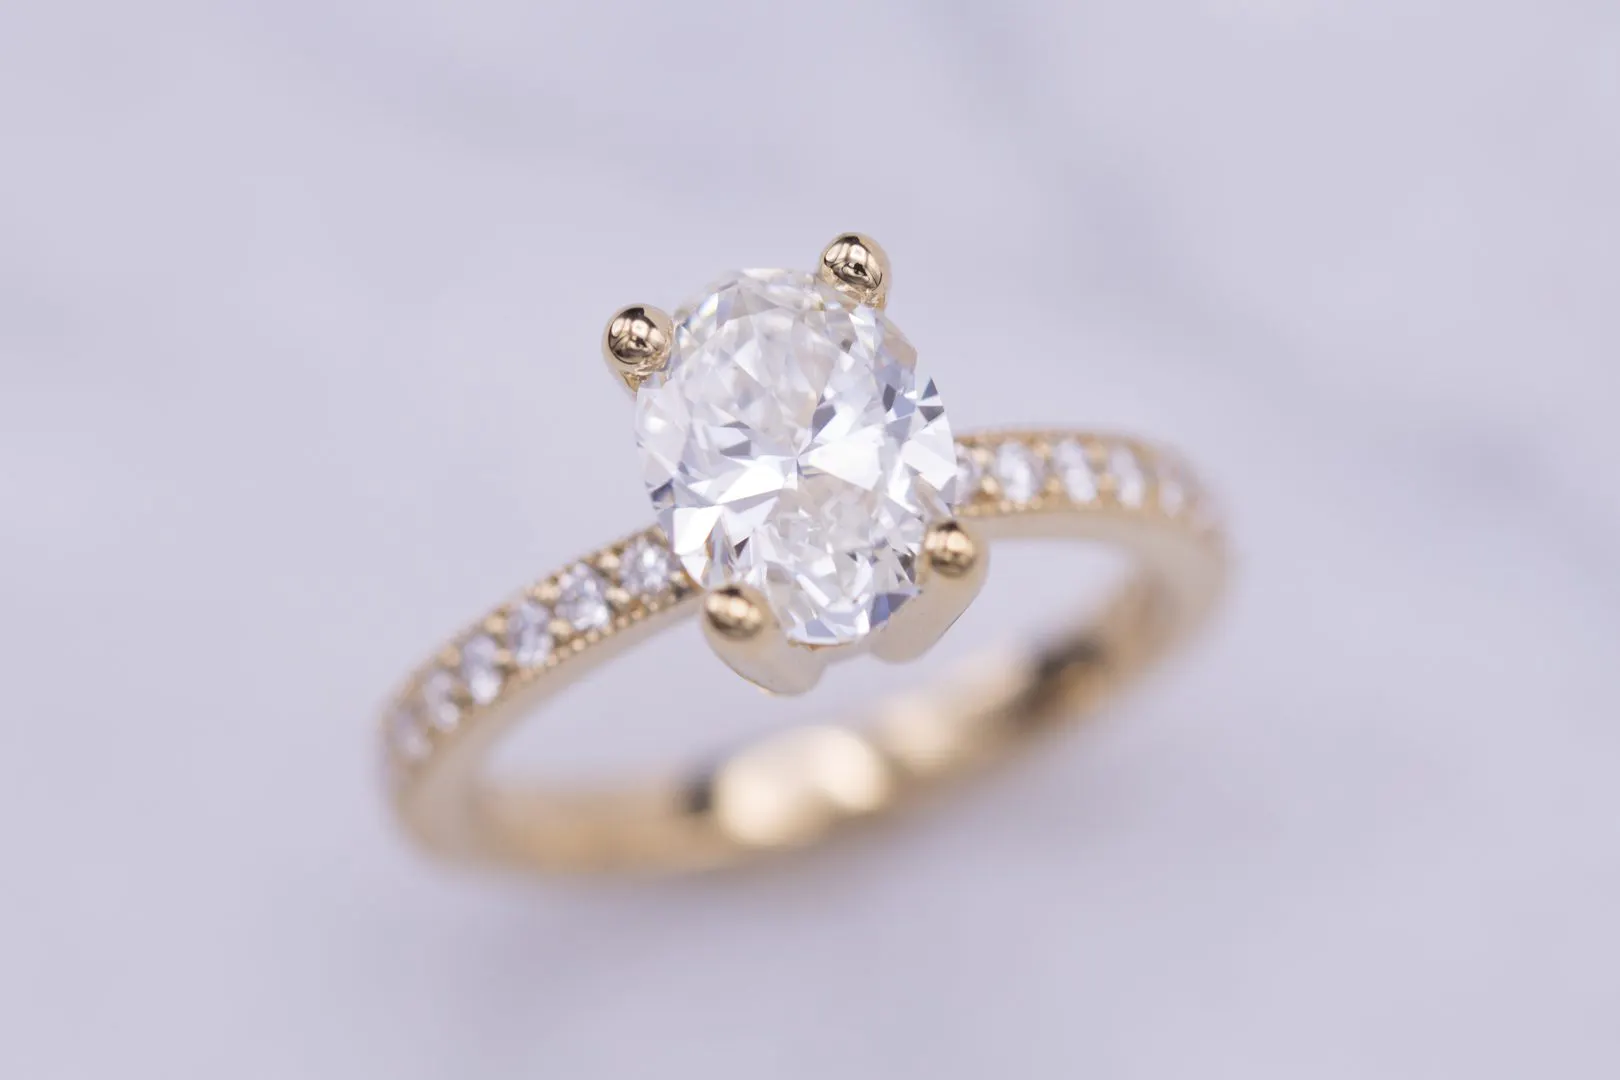 Oval Cut Diamond Buying Guide